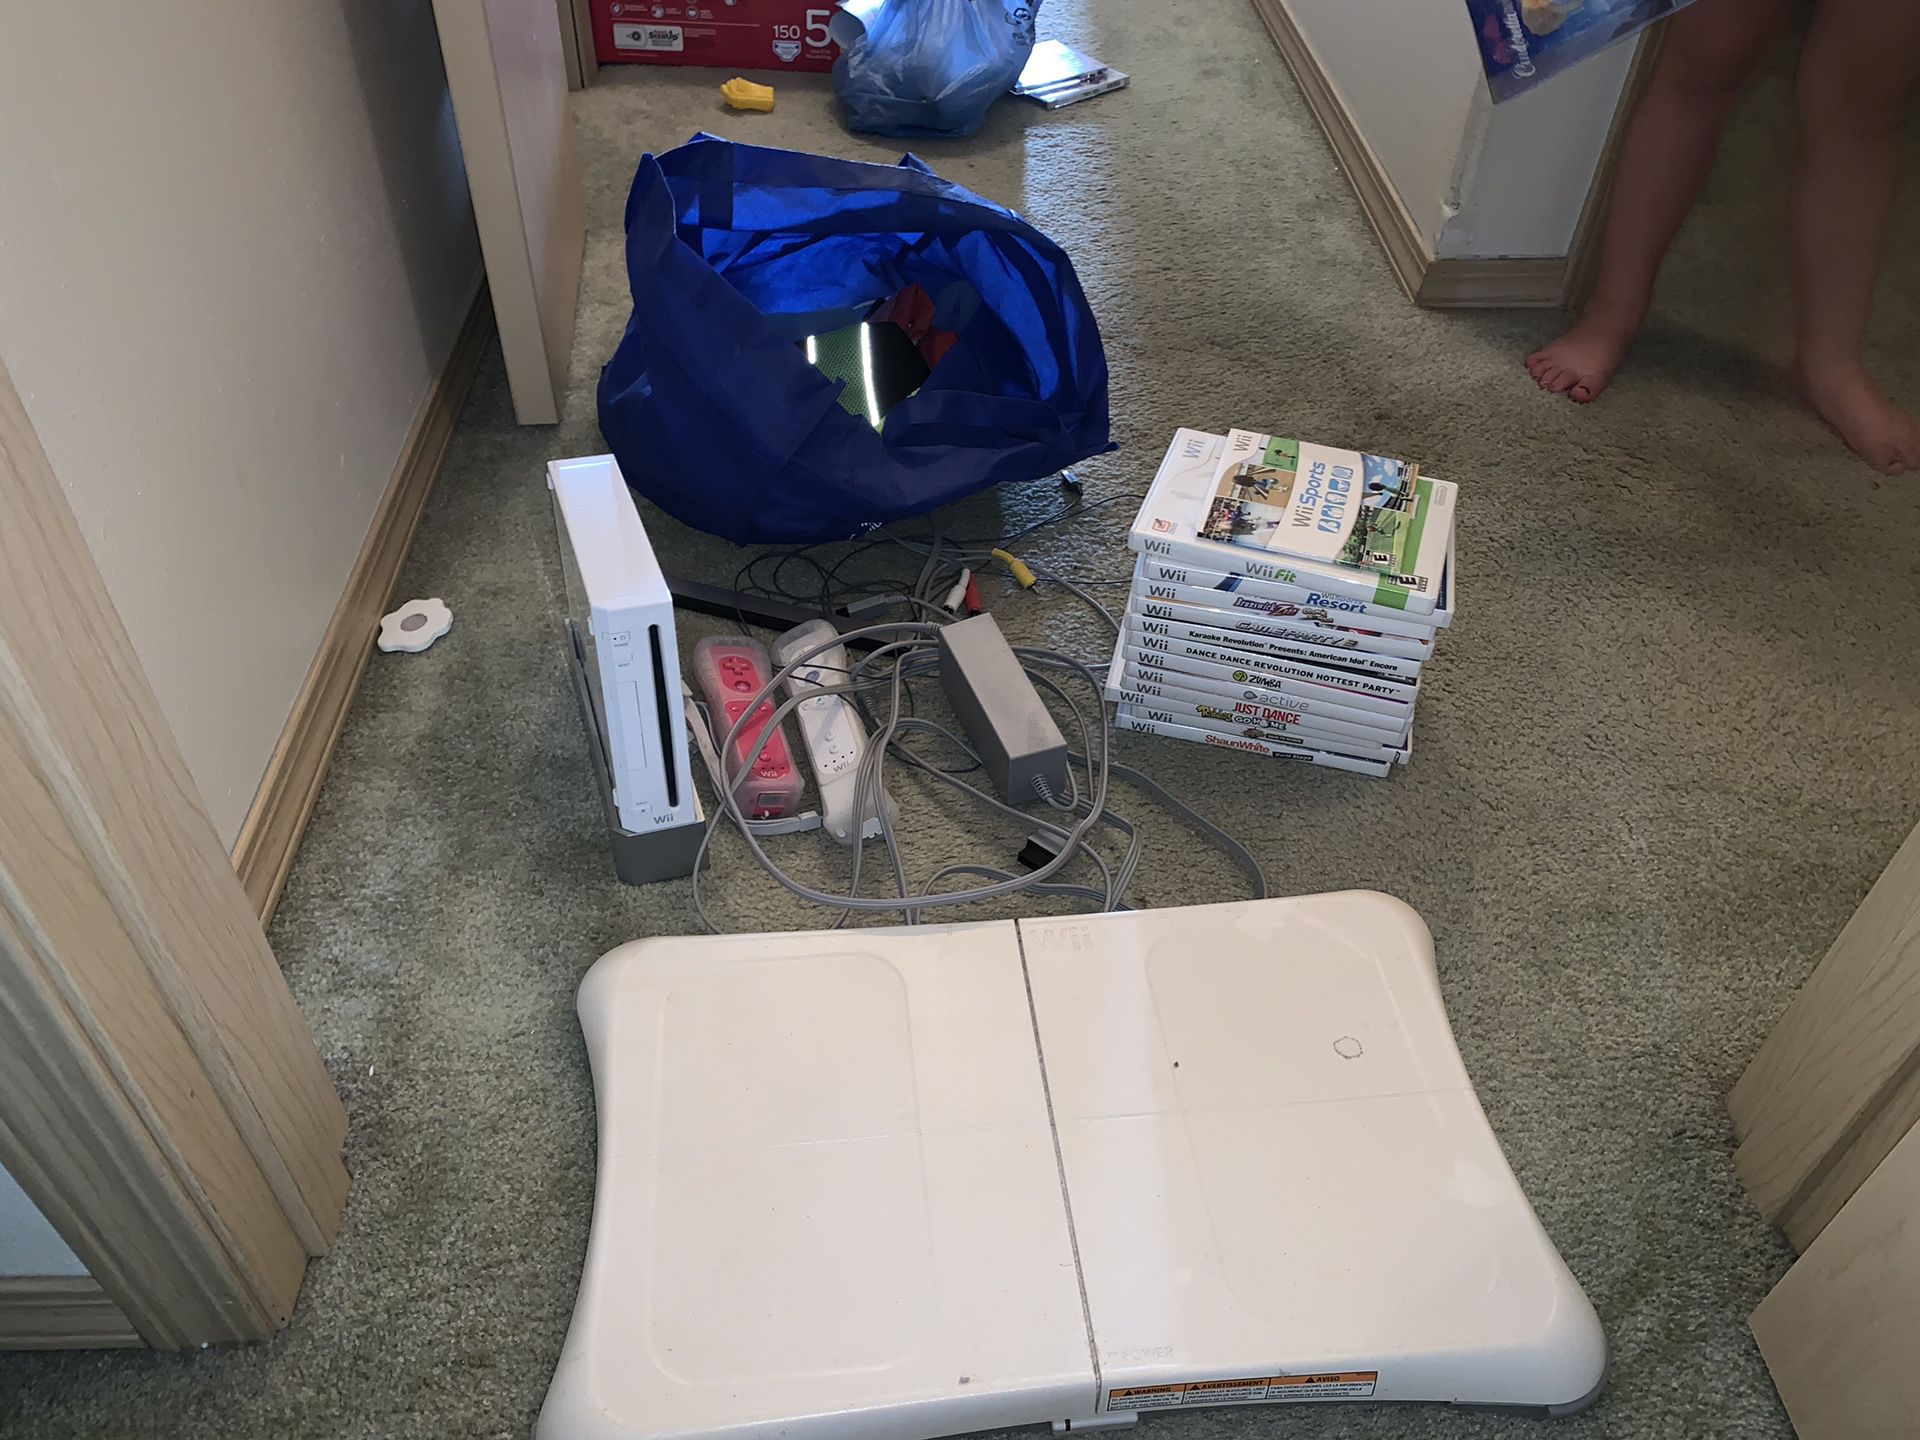 Wii and tons of wii games and accessories